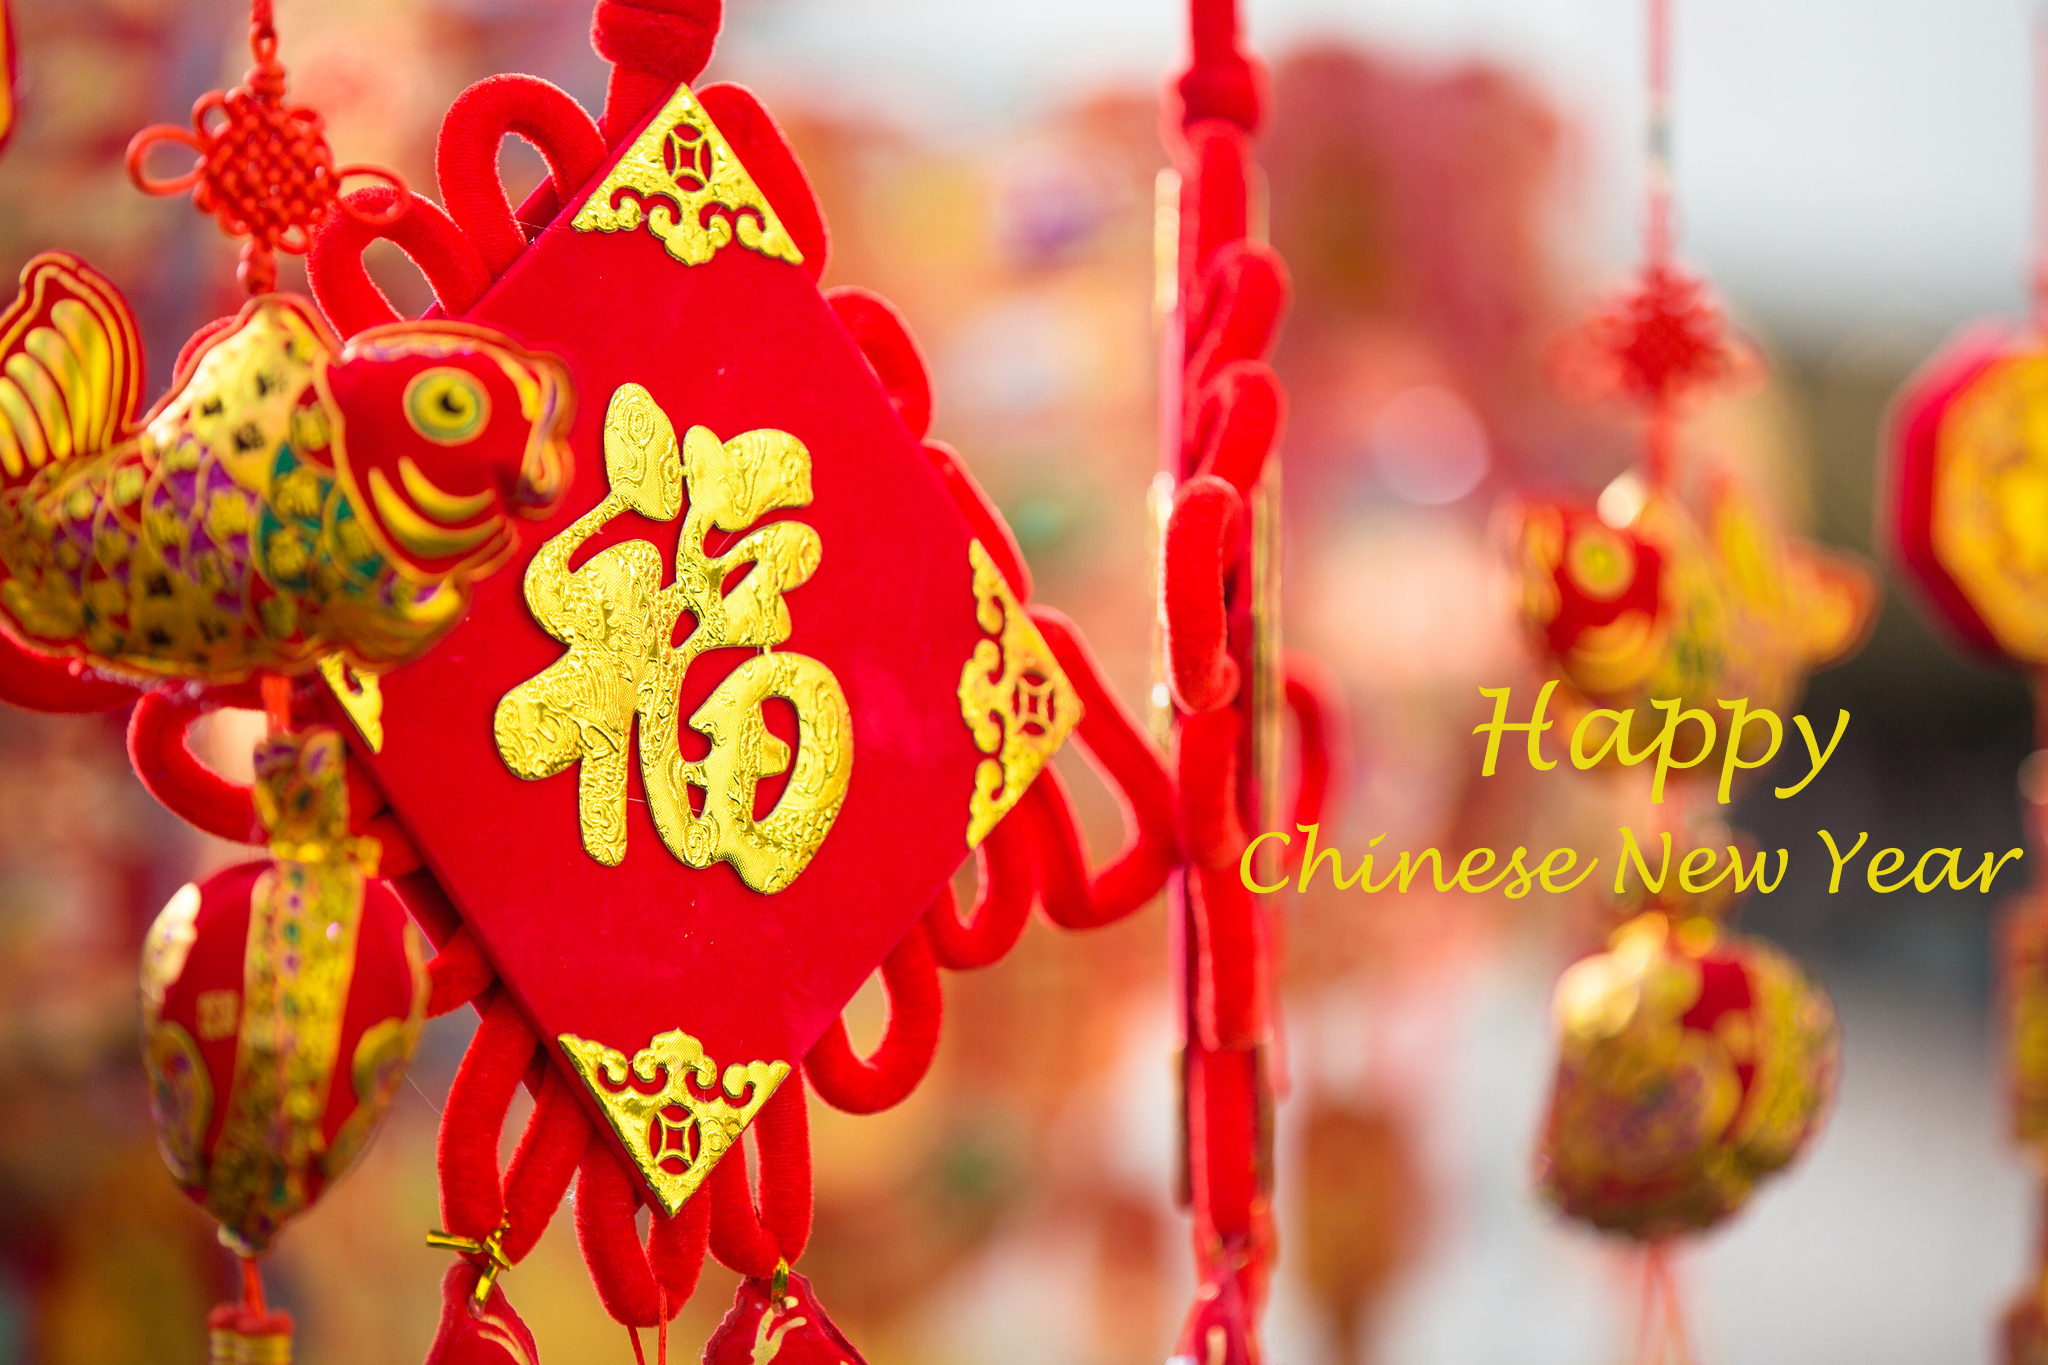 Chinese New Year Decorations for Wallpaper Wallpaper. Wallpaper Download. High Resolution Wallpaper